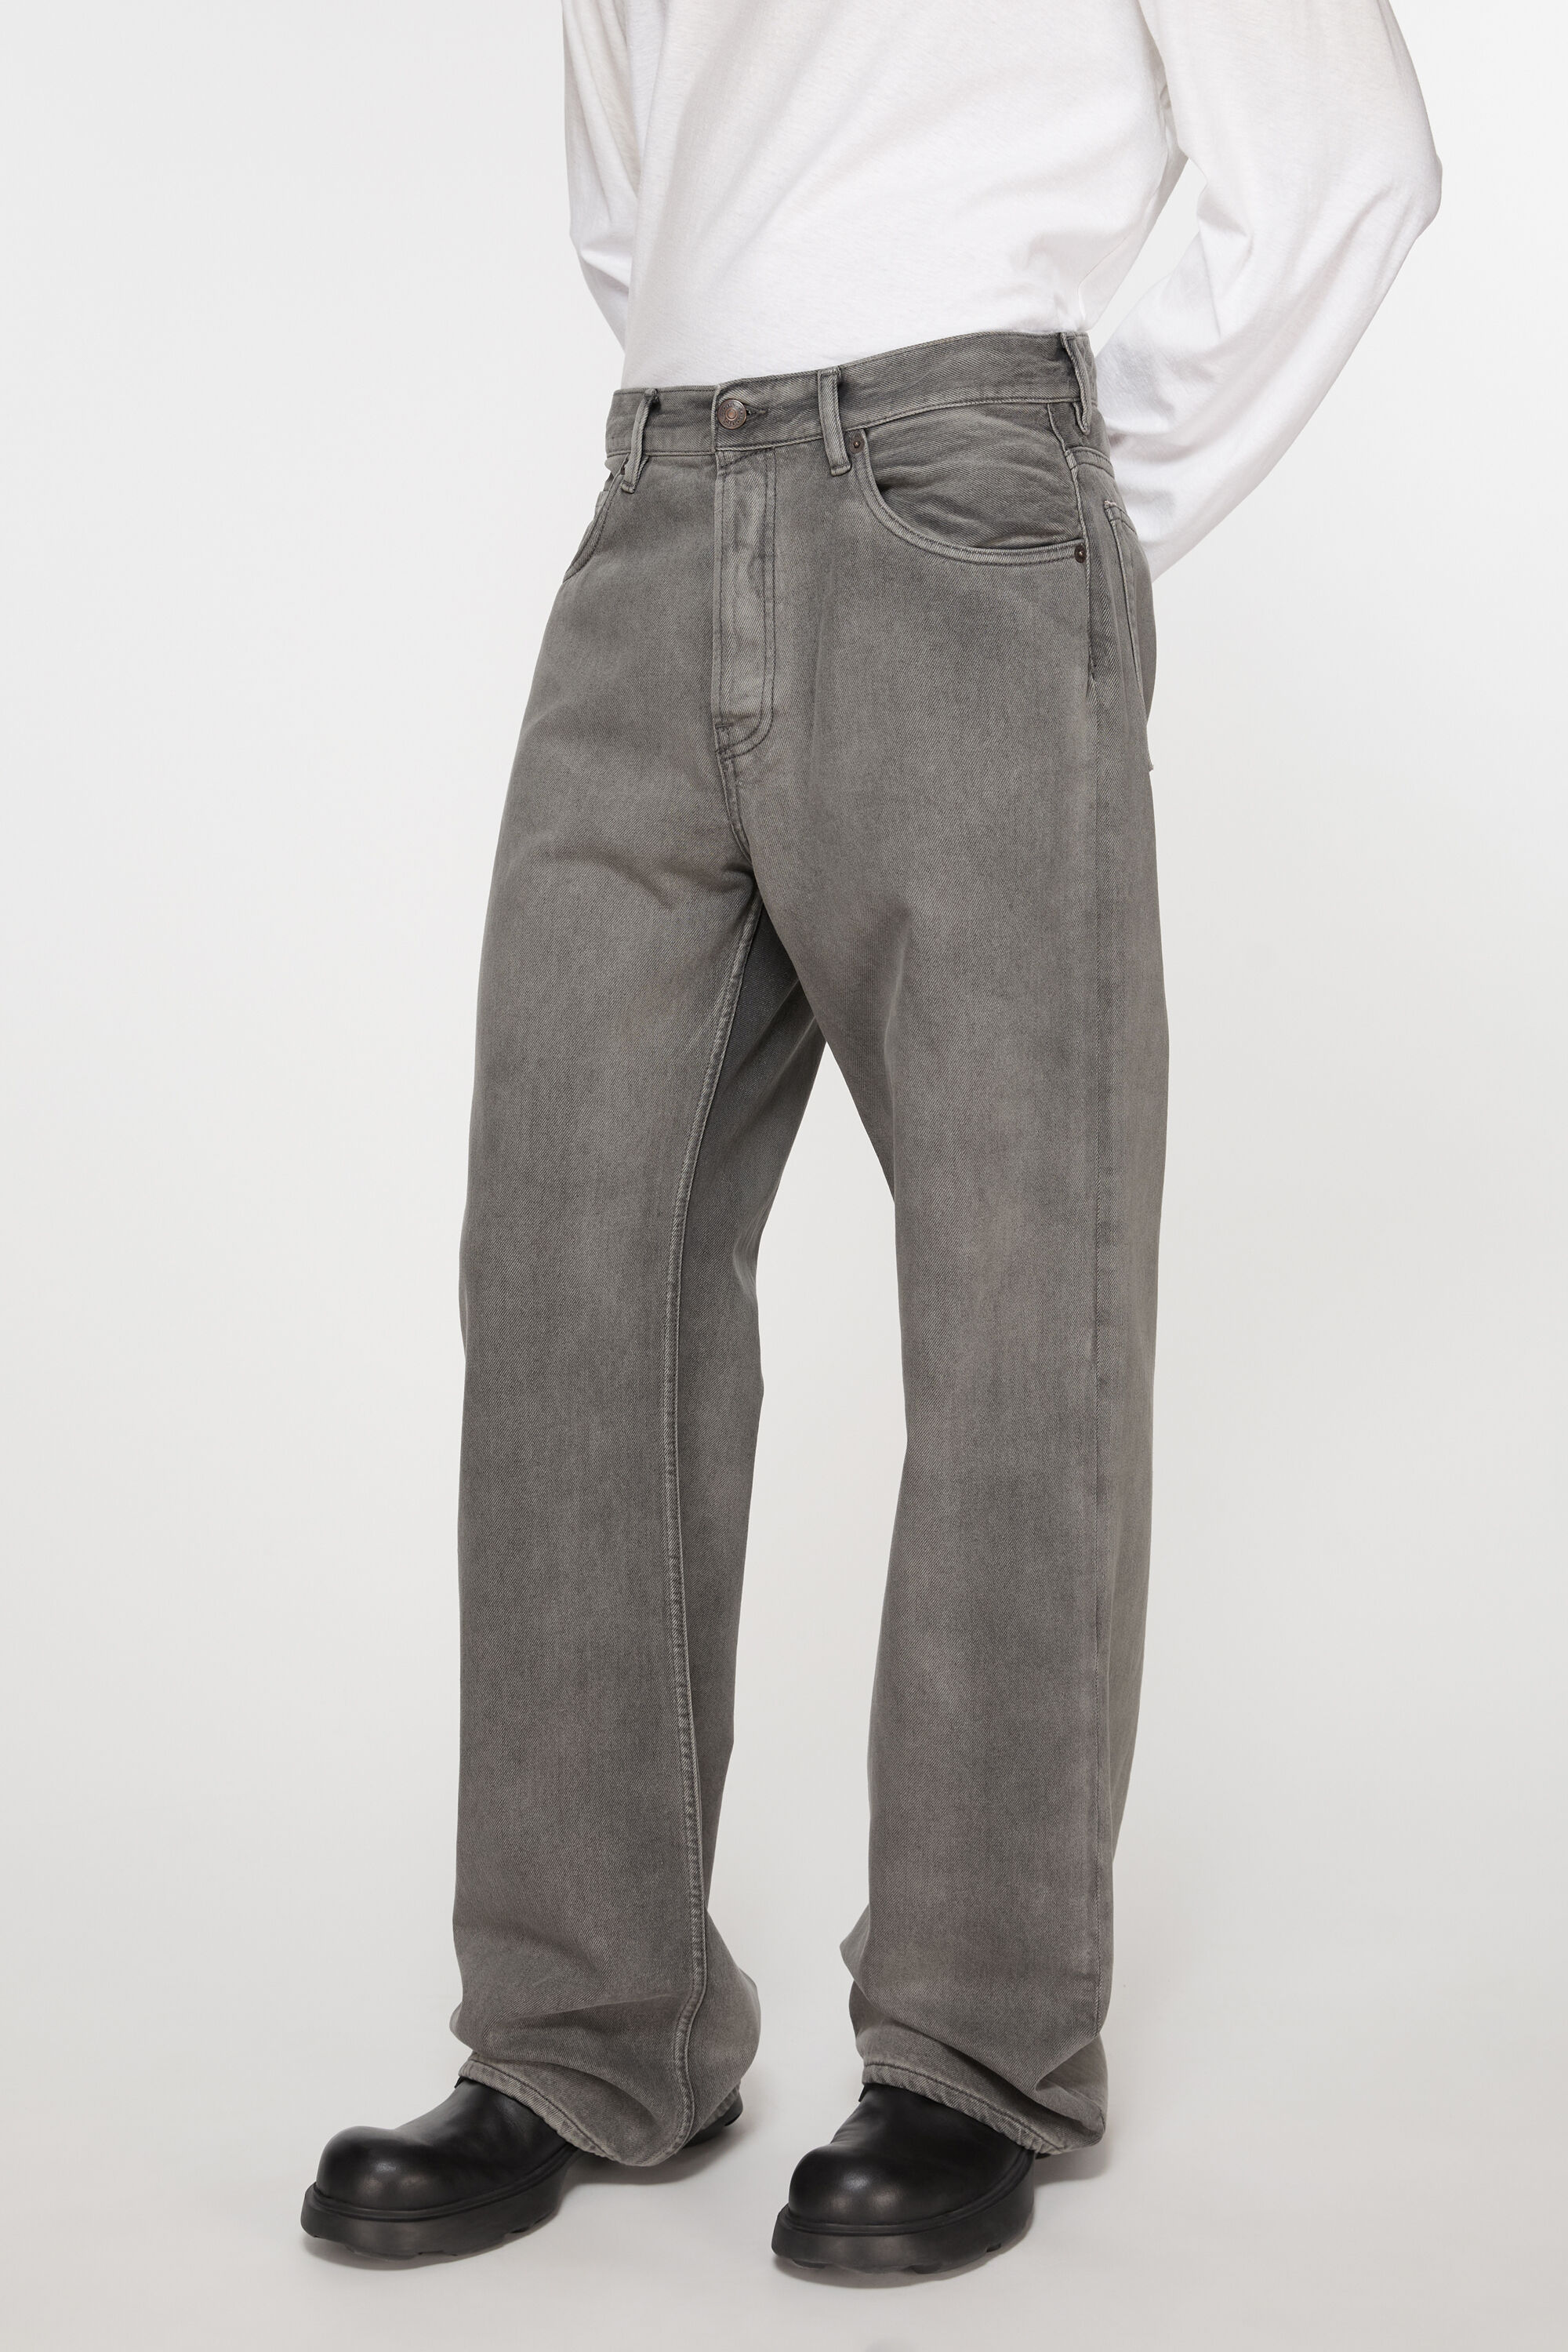 Acne Studios - Loose fit jeans - 2021M - Anthracite grey